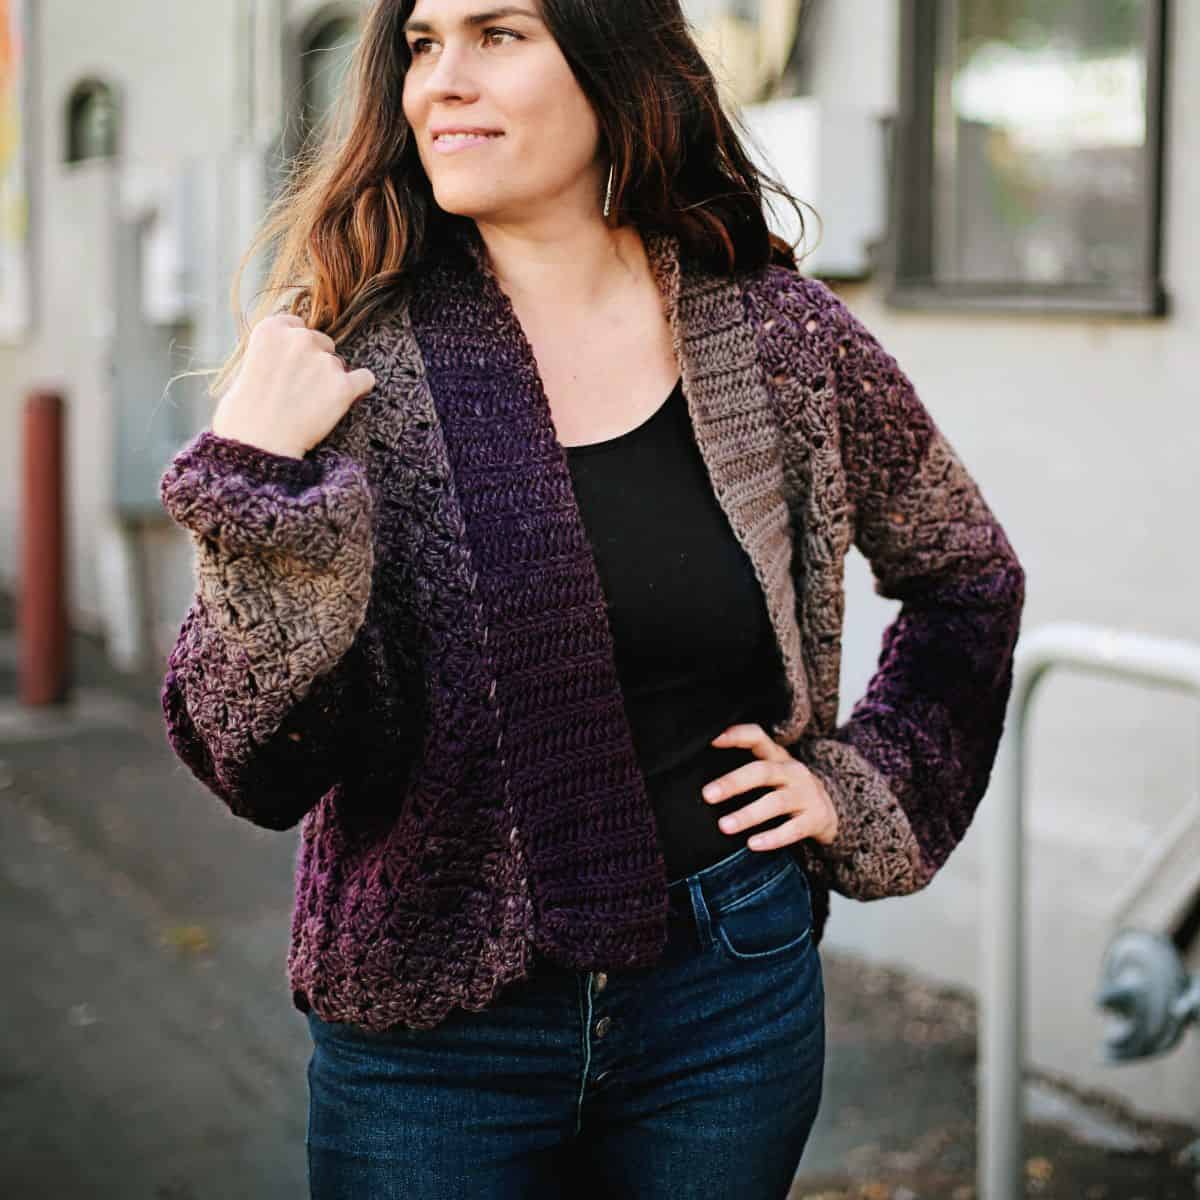 A woman wearing a purple crochet cardigan and jeans.